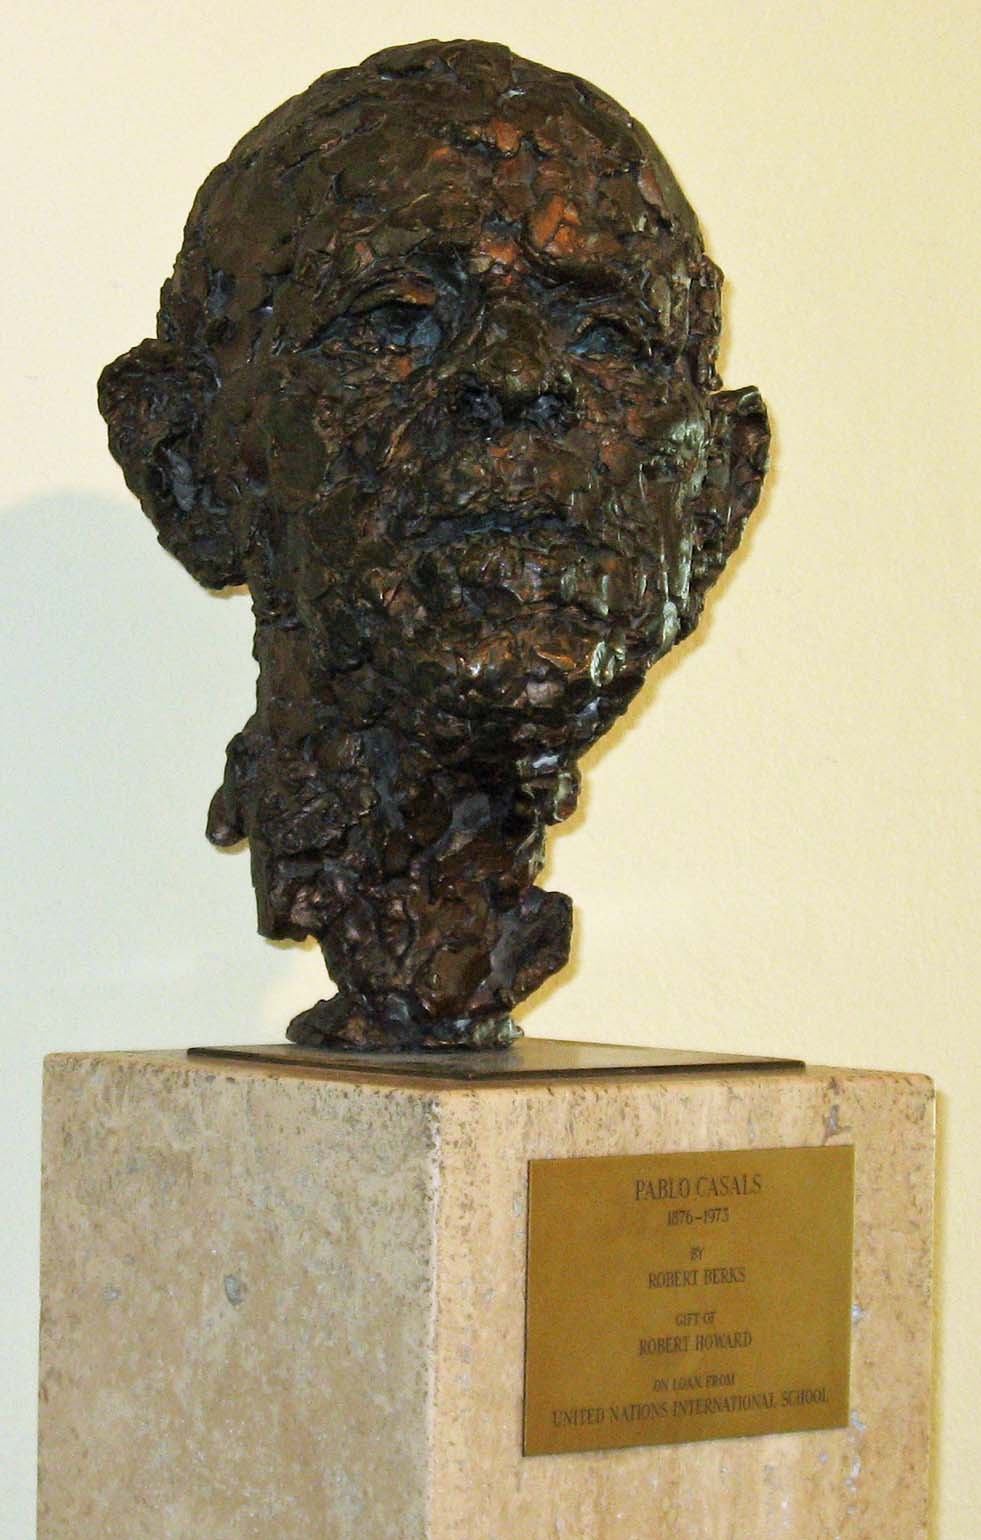 Bust of Pablo Casals, UNNY139L, 1977, On Permanent Loan from the UN International School